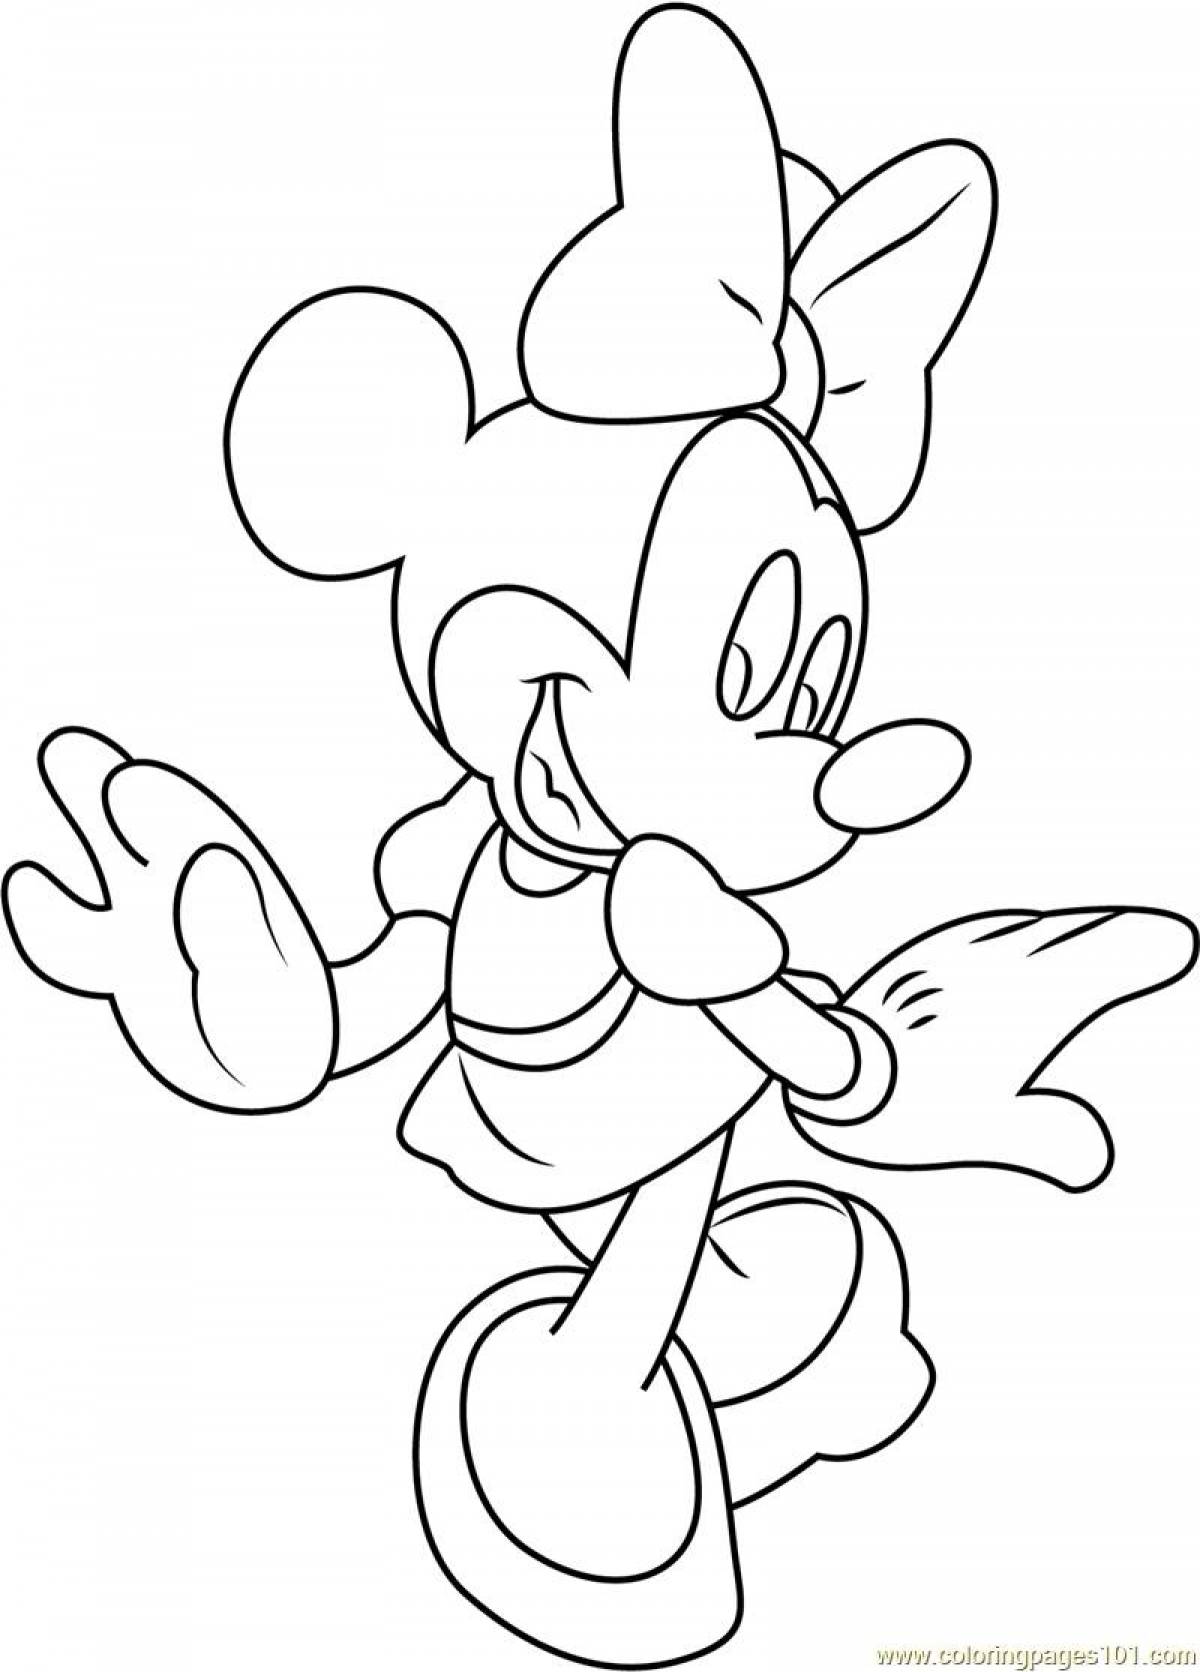 Mickey mouse humorous coloring book for girls